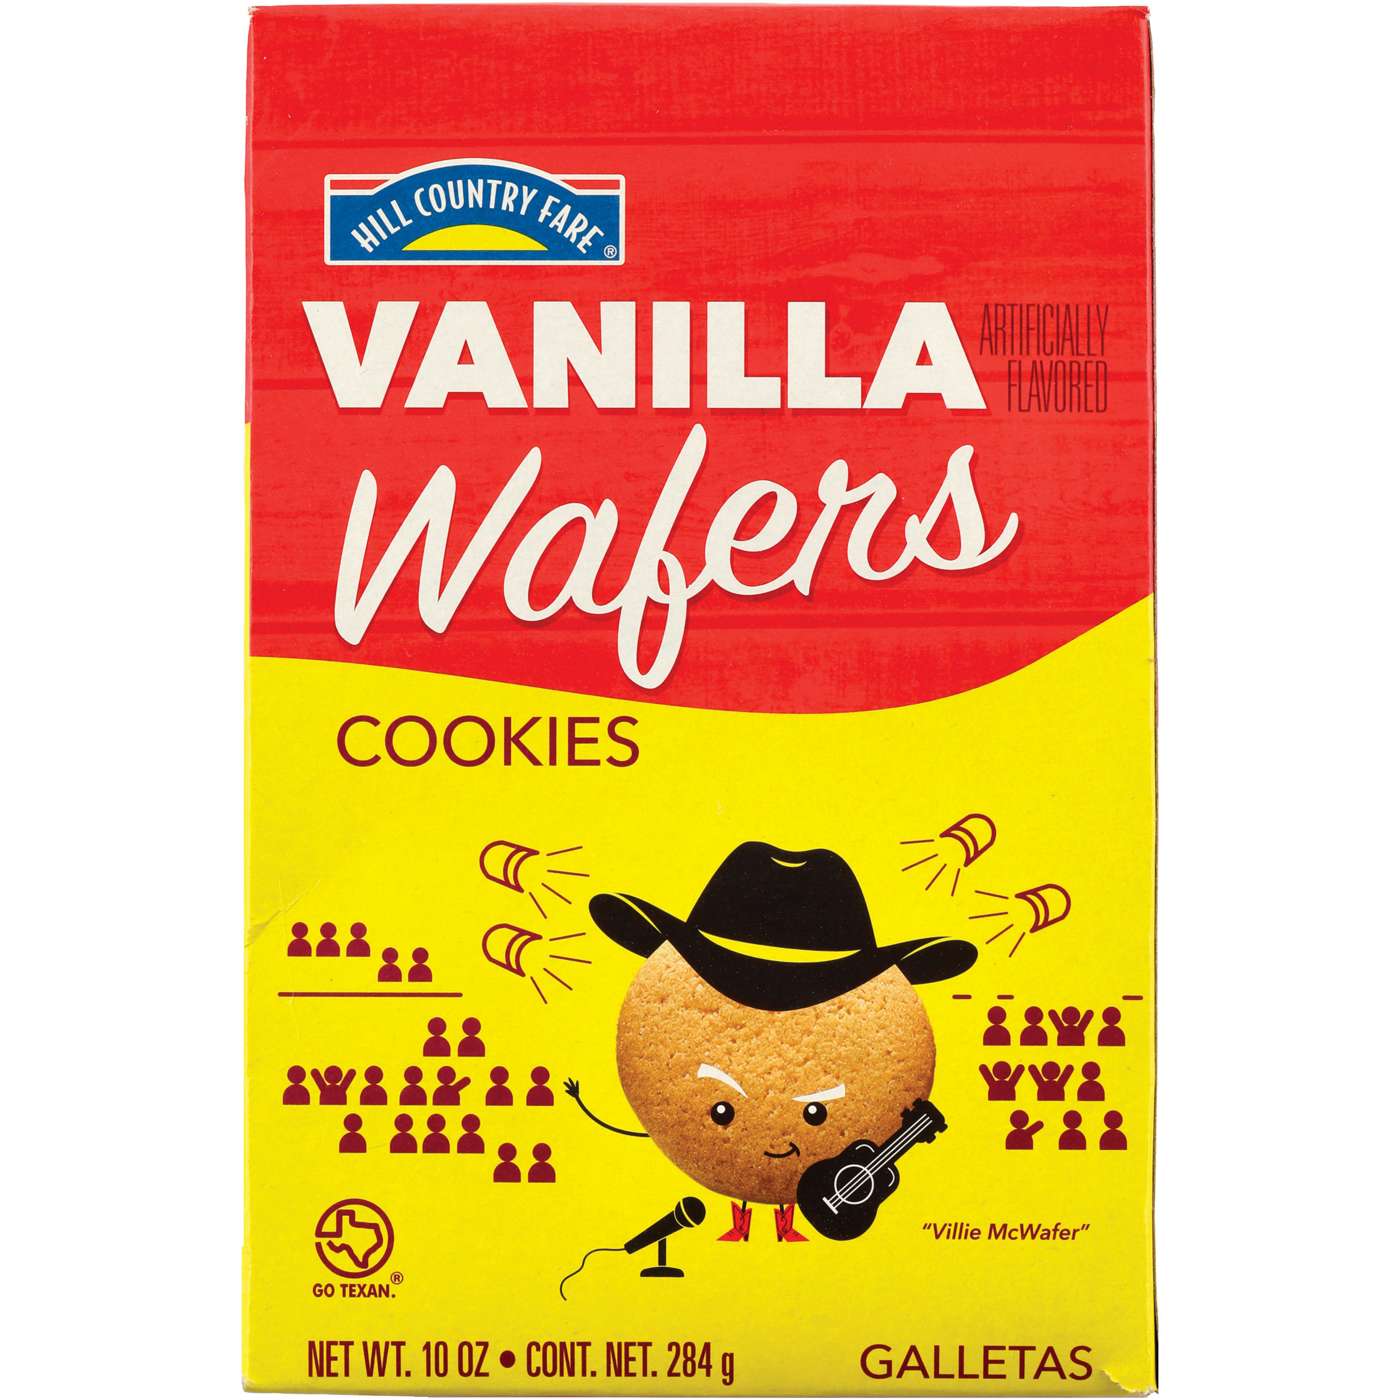 Hill Country Fare Vanilla Wafers Cookies; image 1 of 2